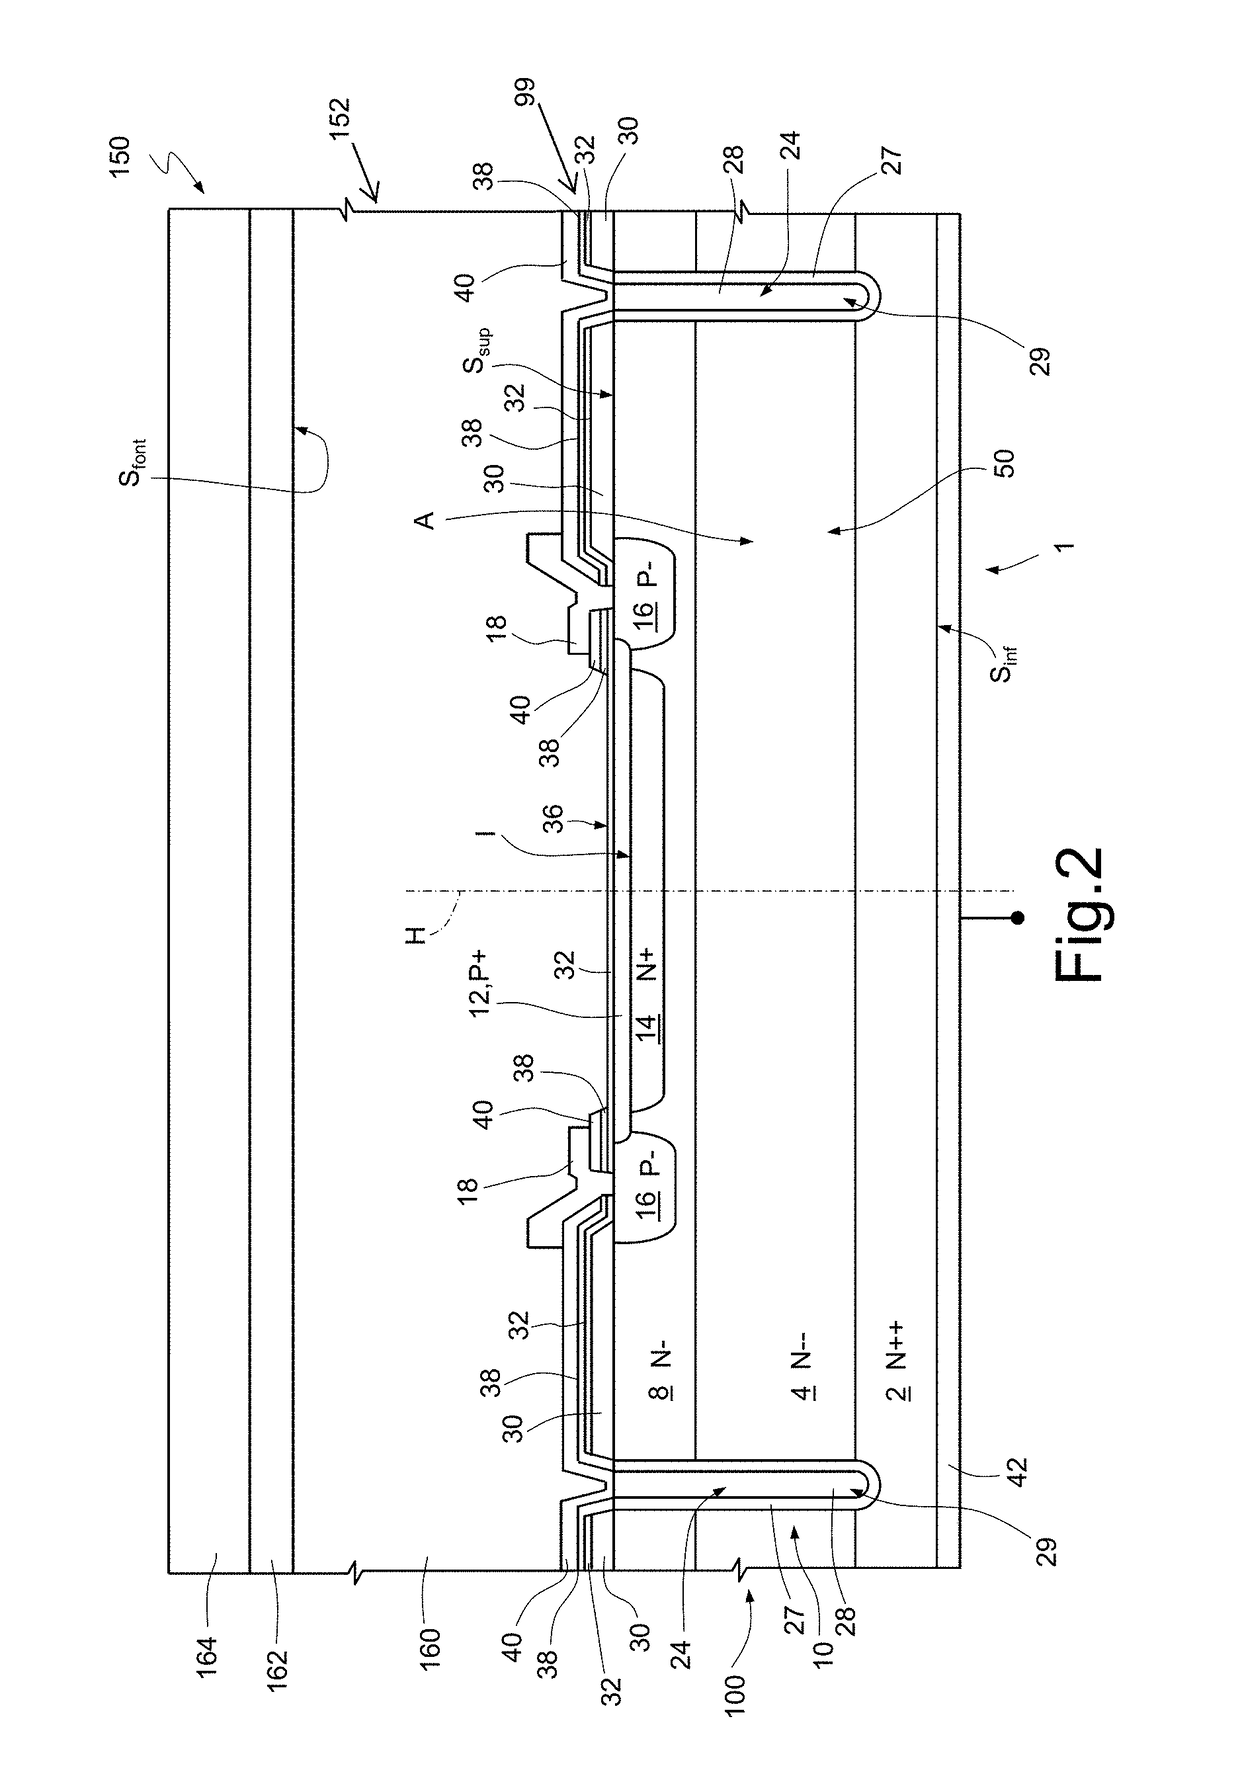 Array of geiger-mode avalanche photodiodes for detecting infrared radiation